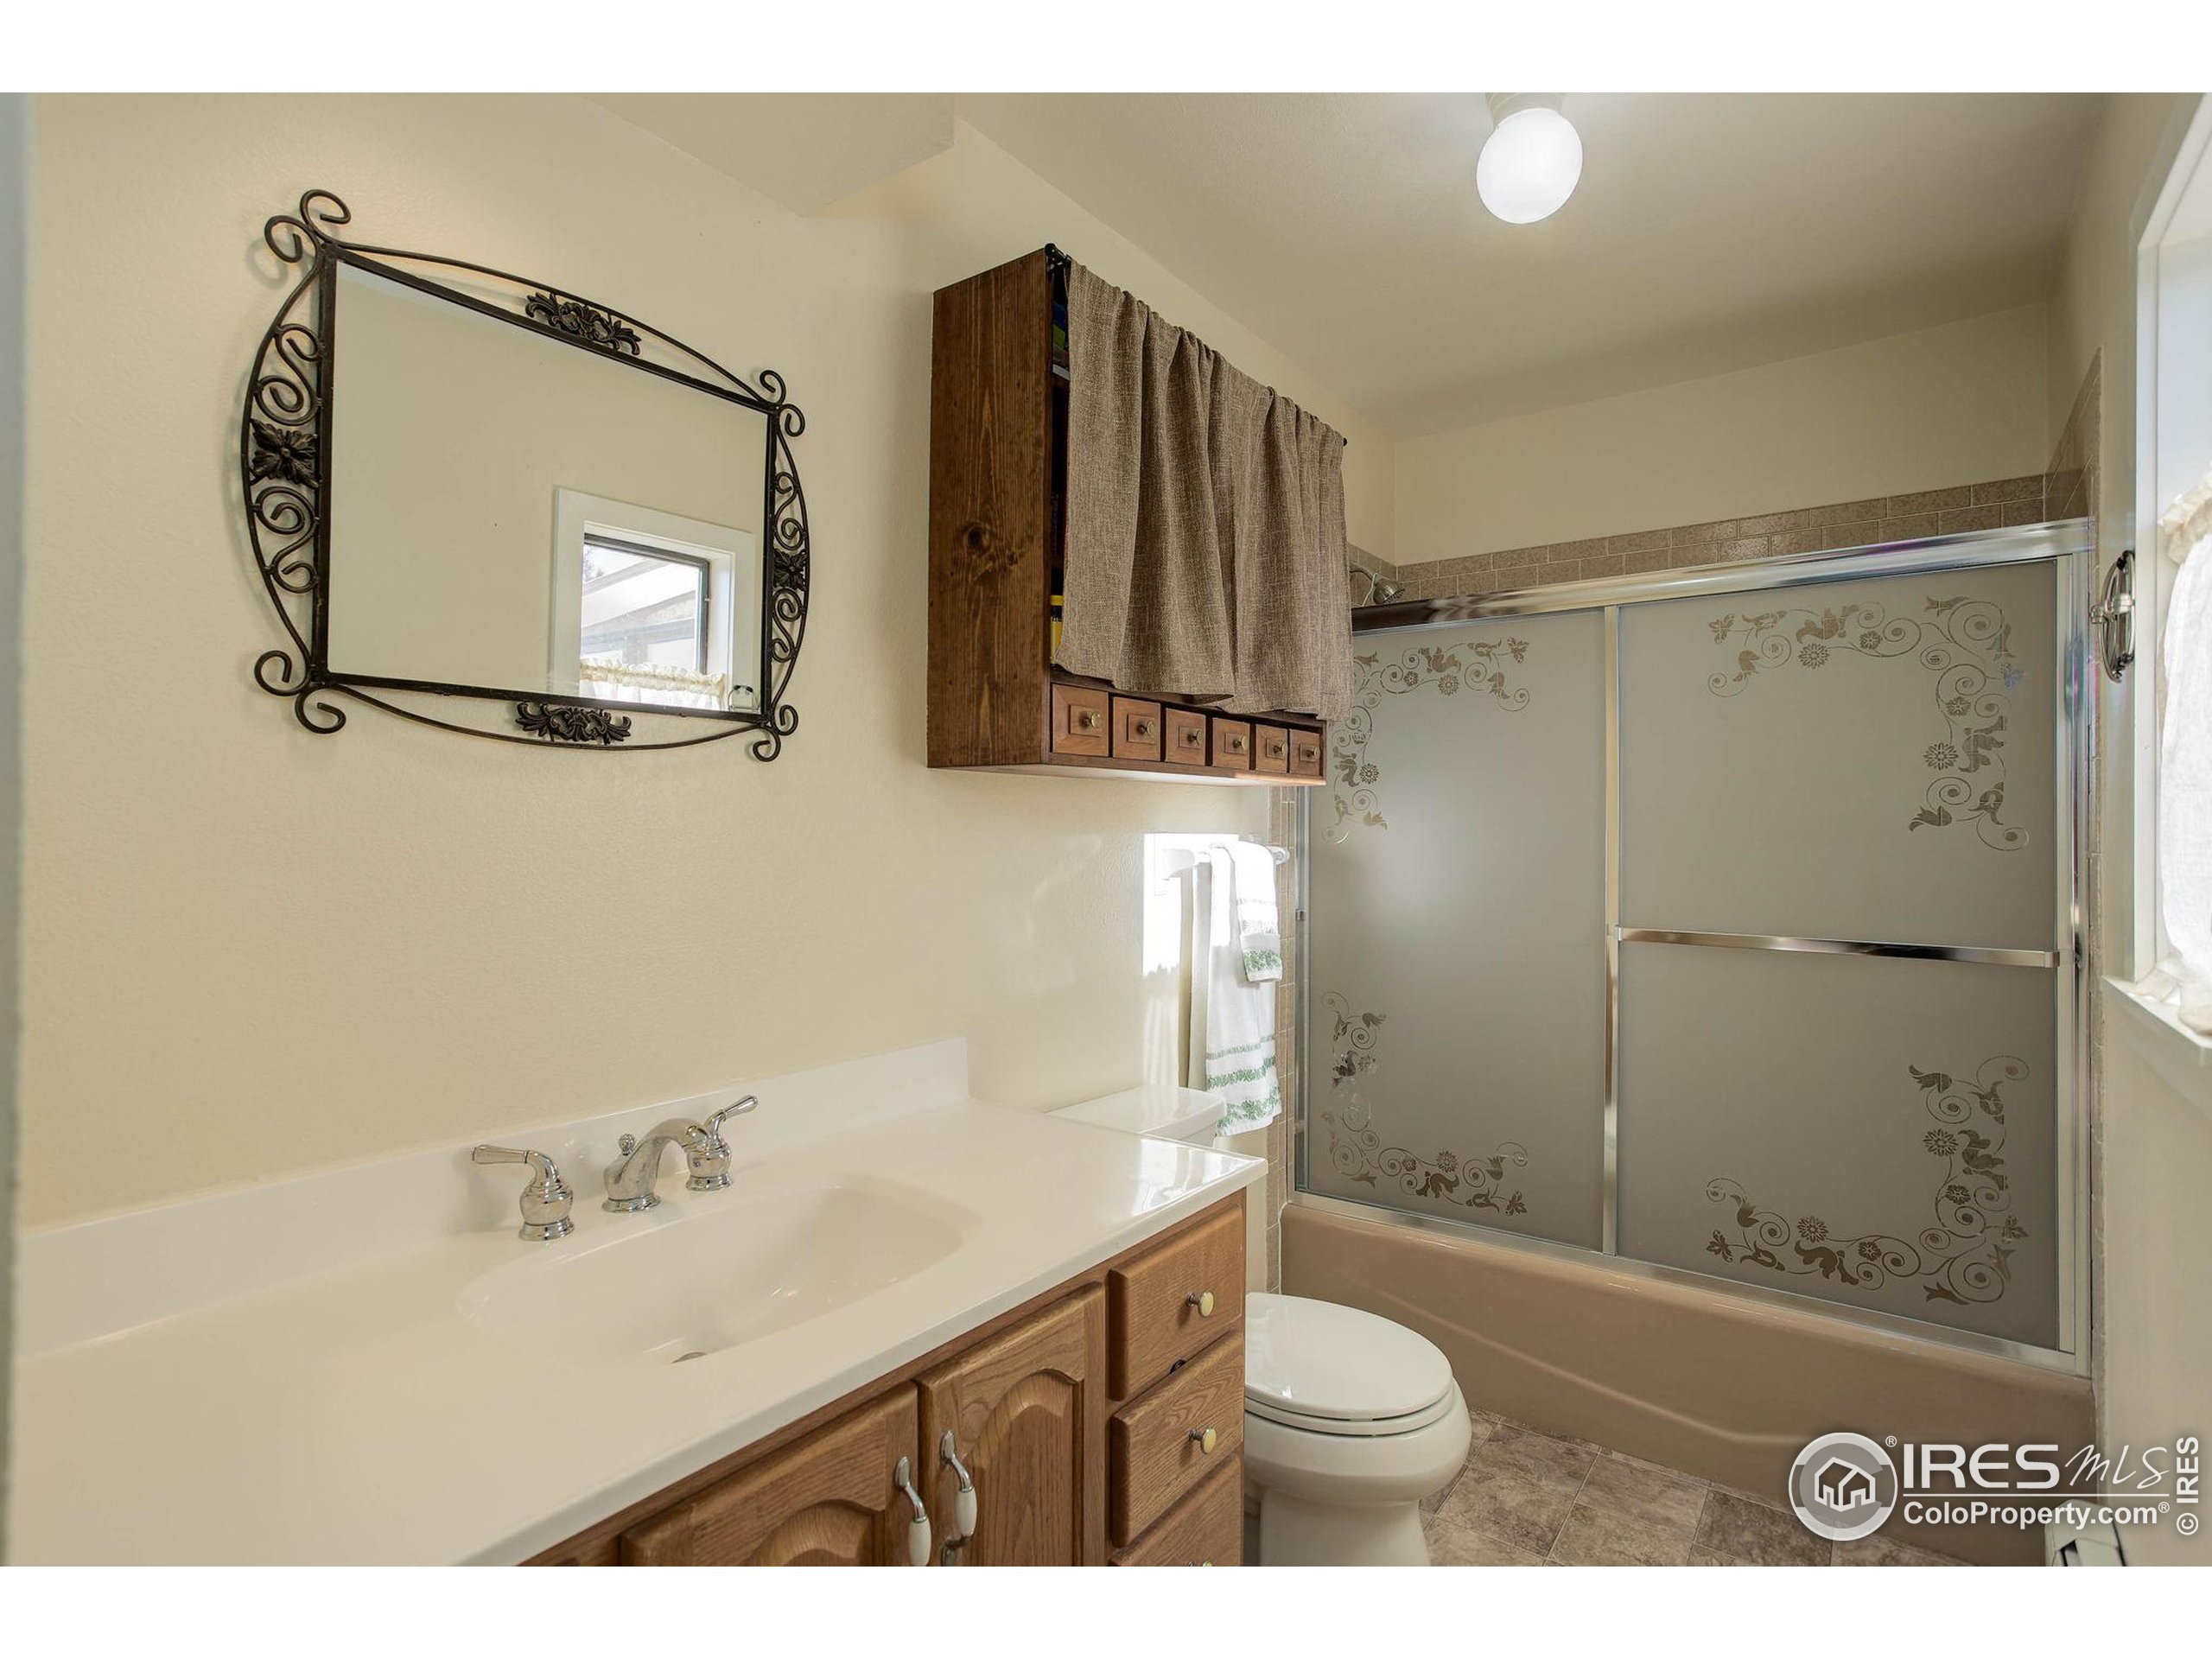 8586 N 55th St, Longmont, Colorado, 80503, United States, 3 Bedrooms Bedrooms, ,2 BathroomsBathrooms,Residential,For Sale,8586 N 55th St,1500409